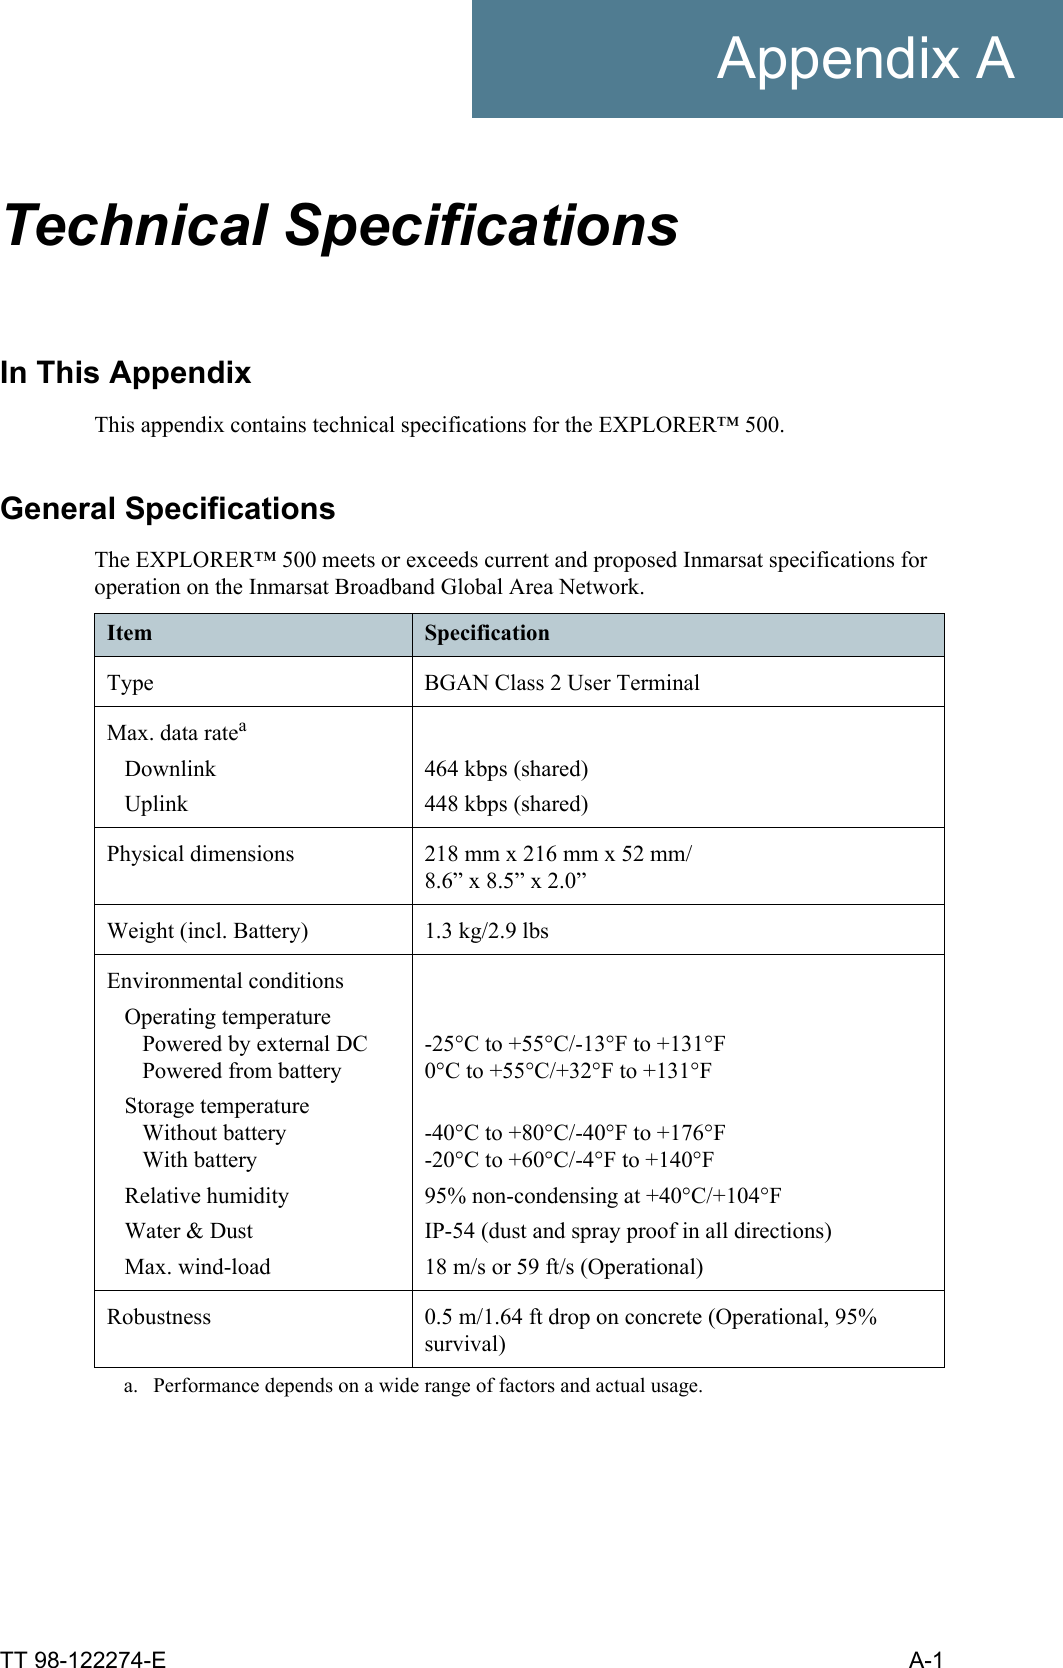 TT 98-122274-E A-1Appendix ATechnical Specifications AIn This AppendixThis appendix contains technical specifications for the EXPLORER™ 500. General SpecificationsThe EXPLORER™ 500 meets or exceeds current and proposed Inmarsat specifications for operation on the Inmarsat Broadband Global Area Network.Item SpecificationType BGAN Class 2 User TerminalMax. data rateaDownlinkUplinka. Performance depends on a wide range of factors and actual usage.464 kbps (shared)448 kbps (shared)Physical dimensions 218 mm x 216 mm x 52 mm/8.6” x 8.5” x 2.0”Weight (incl. Battery) 1.3 kg/2.9 lbsEnvironmental conditionsOperating temperaturePowered by external DCPowered from batteryStorage temperatureWithout batteryWith batteryRelative humidityWater &amp; DustMax. wind-load-25°C to +55°C/-13°F to +131°F0°C to +55°C/+32°F to +131°F-40°C to +80°C/-40°F to +176°F -20°C to +60°C/-4°F to +140°F95% non-condensing at +40°C/+104°FIP-54 (dust and spray proof in all directions)18 m/s or 59 ft/s (Operational)Robustness 0.5 m/1.64 ft drop on concrete (Operational, 95% survival)